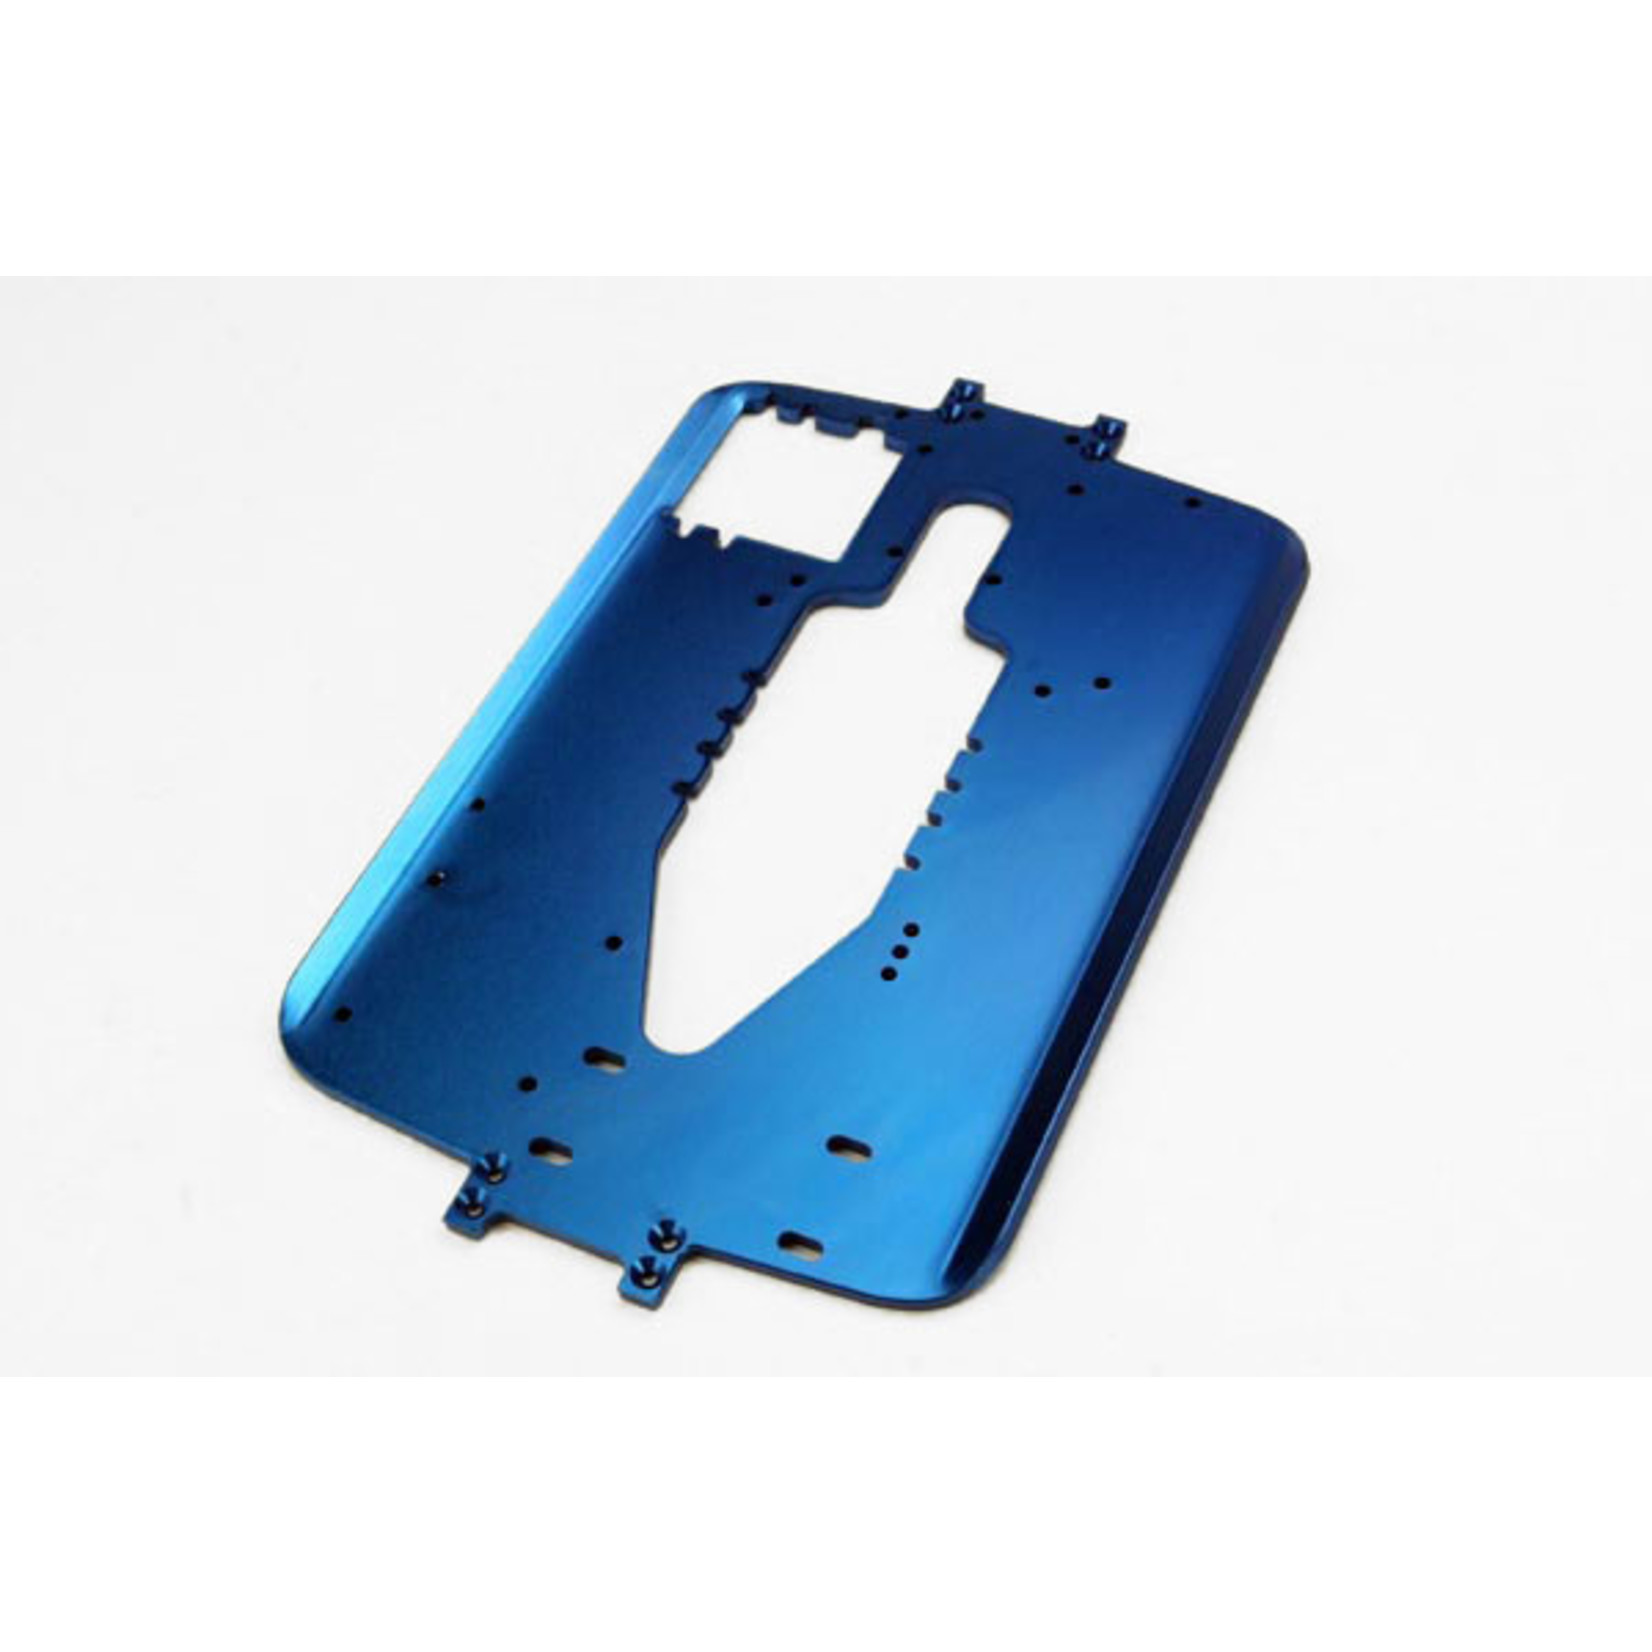 Traxxas 5122R - Chassis, 6061-T6 aluminum (4.0mm) (blue) (stand